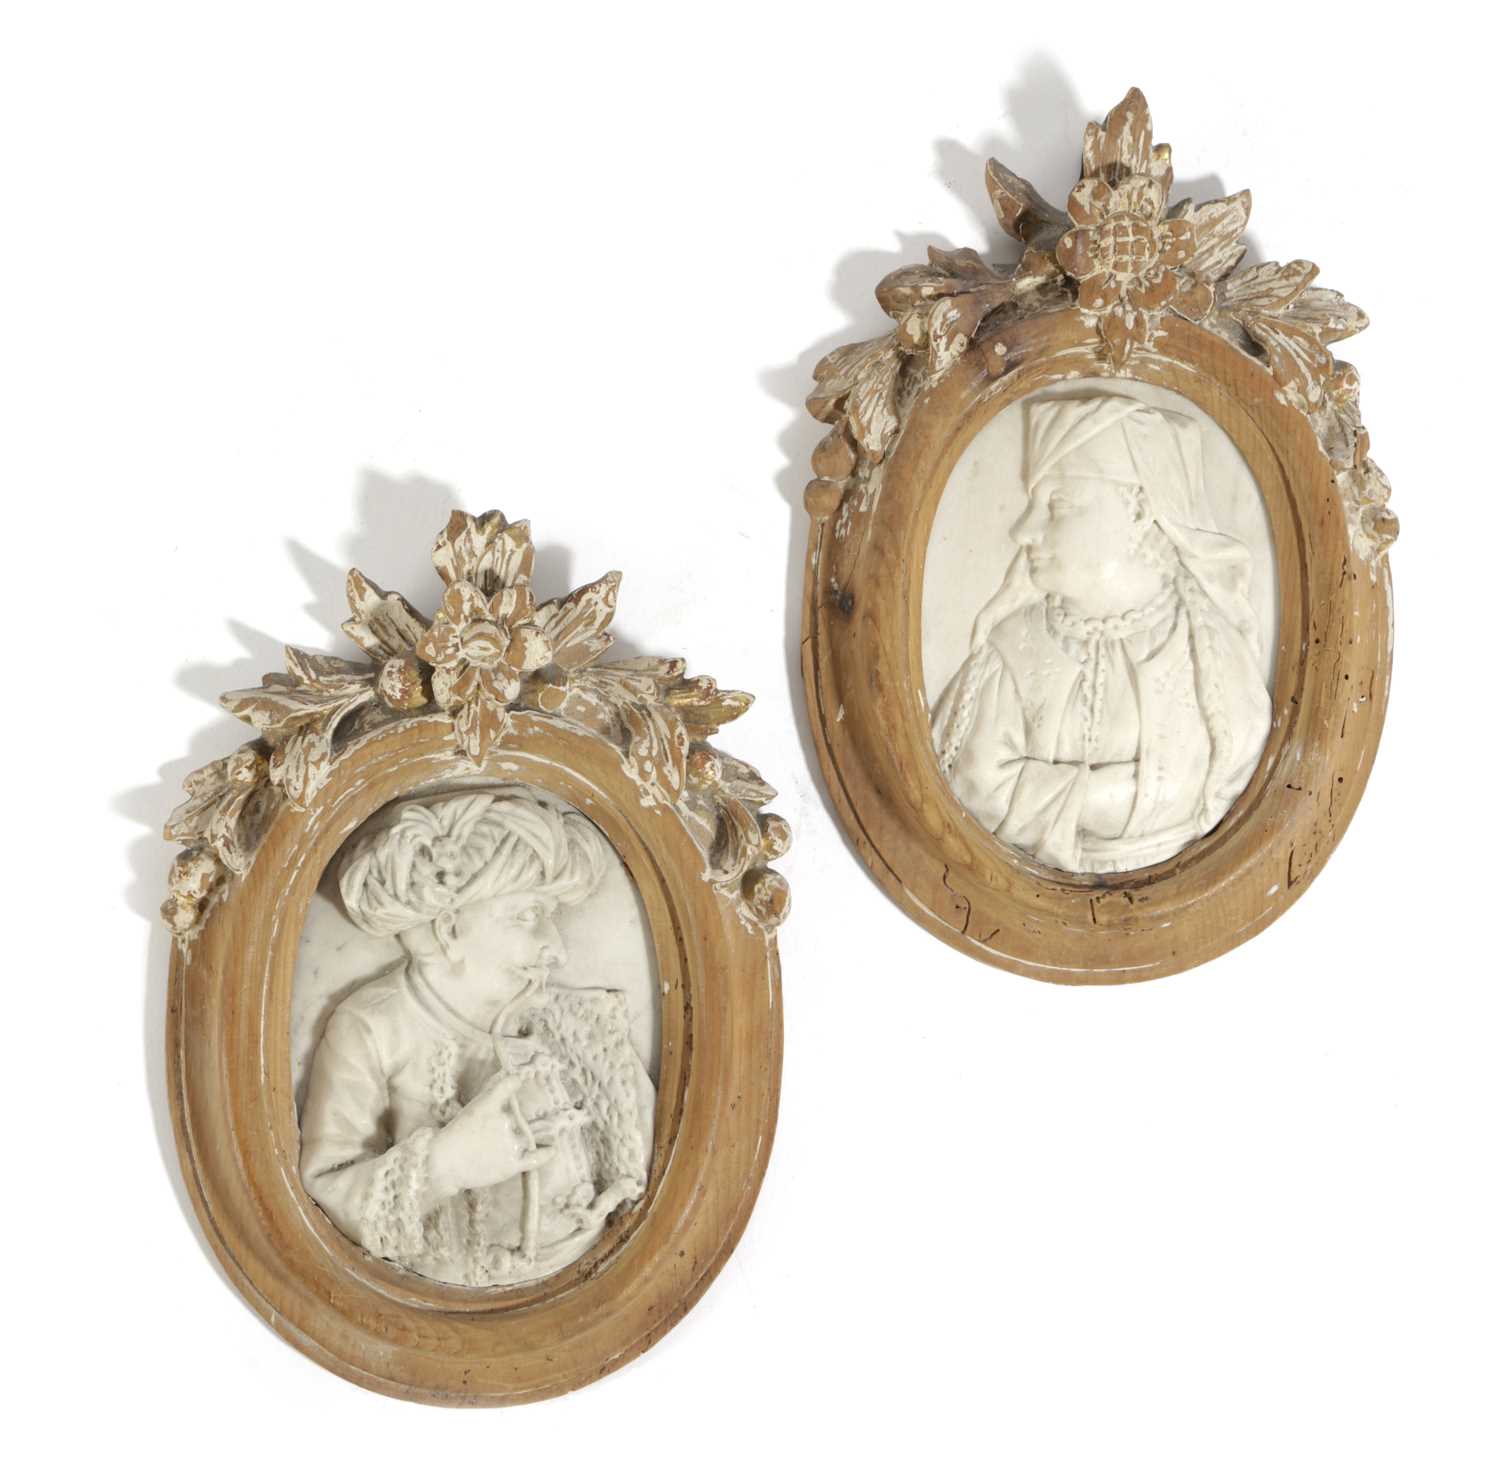 A RARE PAIR OF ITALIAN WHITE MARBLE RELIEF PORTRAITS OF AN OTTOMAN SULTAN AND HIS WIFE ATTRIBUTED TO - Image 2 of 3